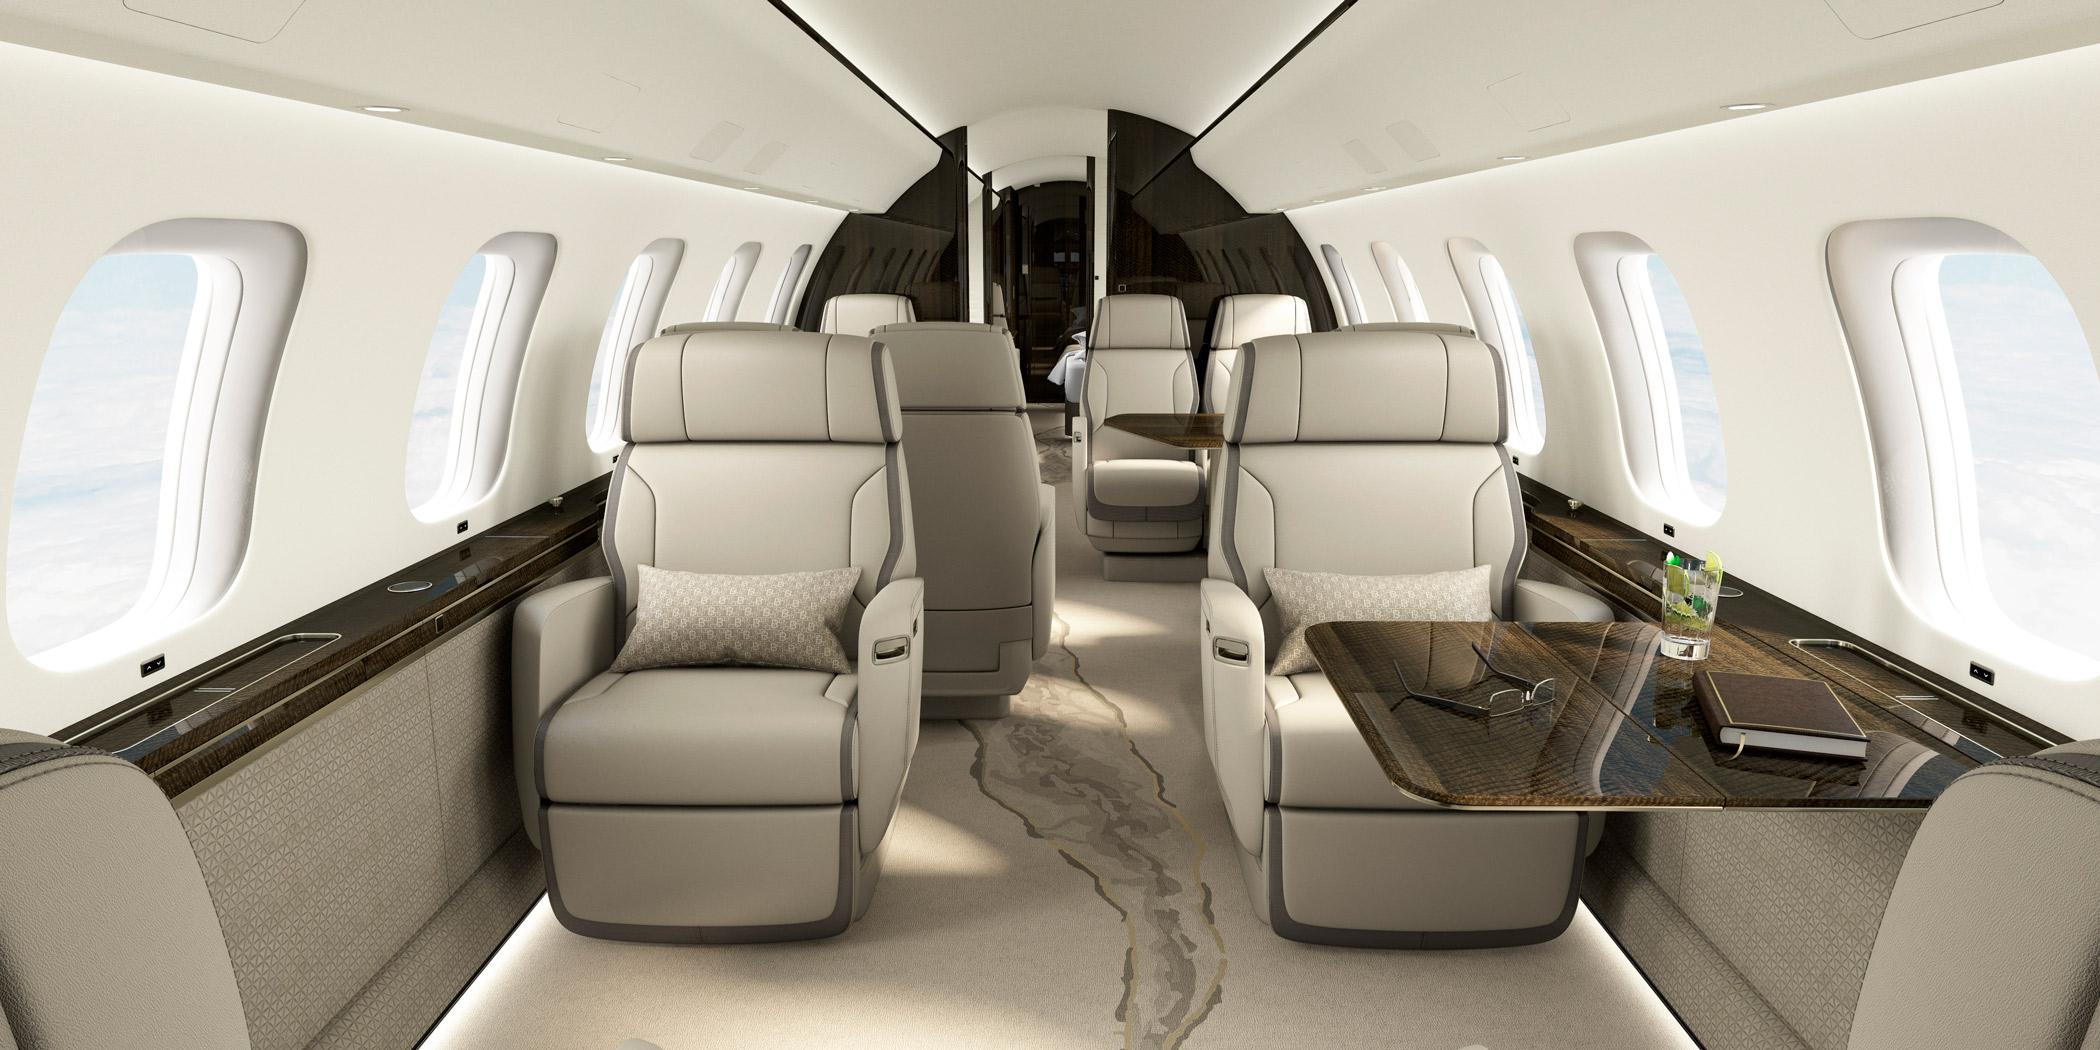 Like its predecessor, the Global 8000 features a three- or four-zone passenger cabin with the Lufthansa nice Touch cabin management system, Nuage zero-gravity single executive seats, and Soleil cabin lighting. 